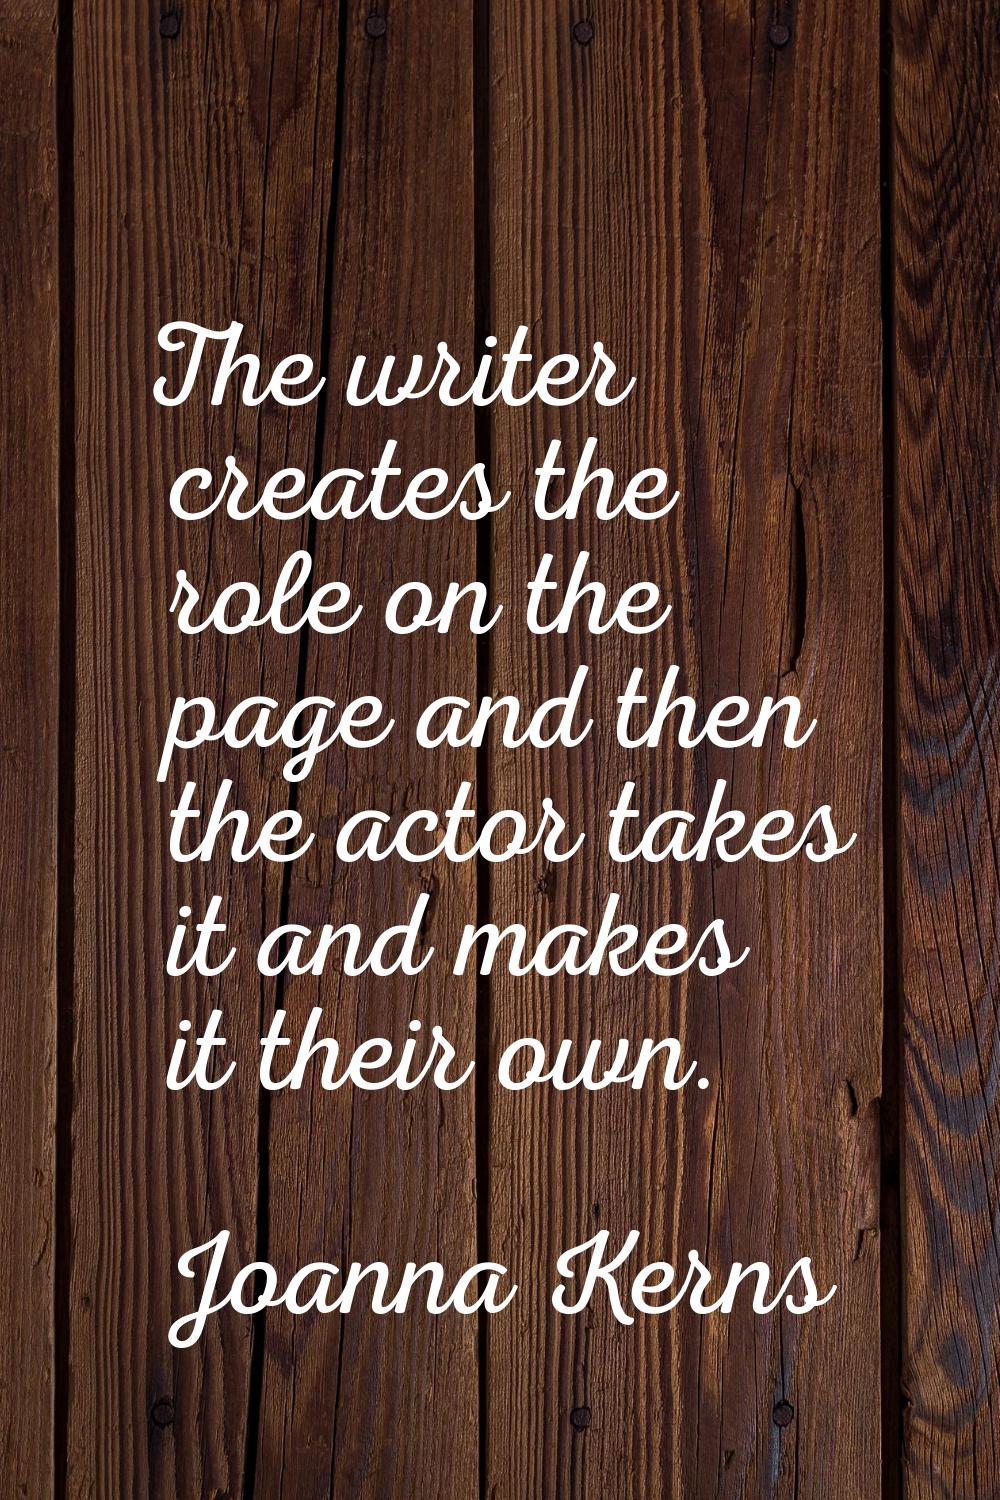 The writer creates the role on the page and then the actor takes it and makes it their own.